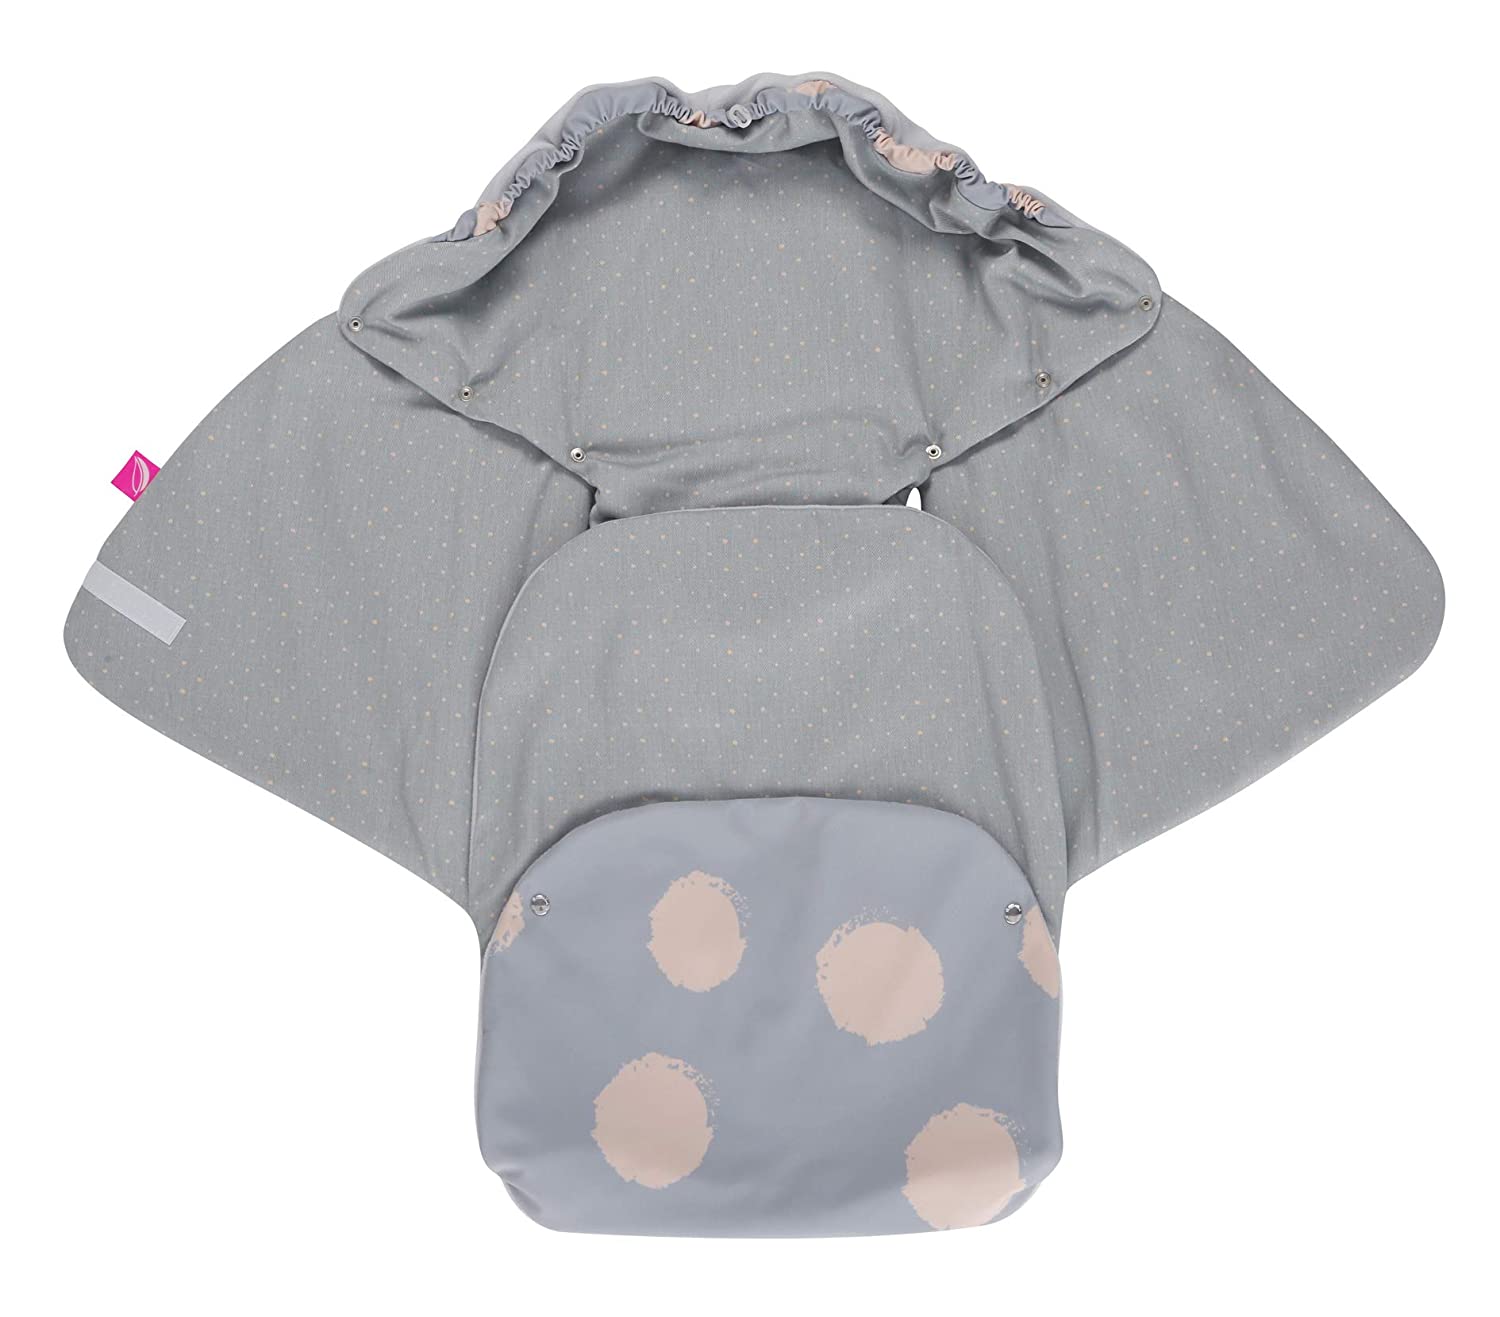 Motherhood Baby Softshell Swaddling Blanket for Baby Seat, Car Seat, Romans and Other Brands, Ideal for Pushchairs, Bicycle Trailers, Buggies - Spots Apricot